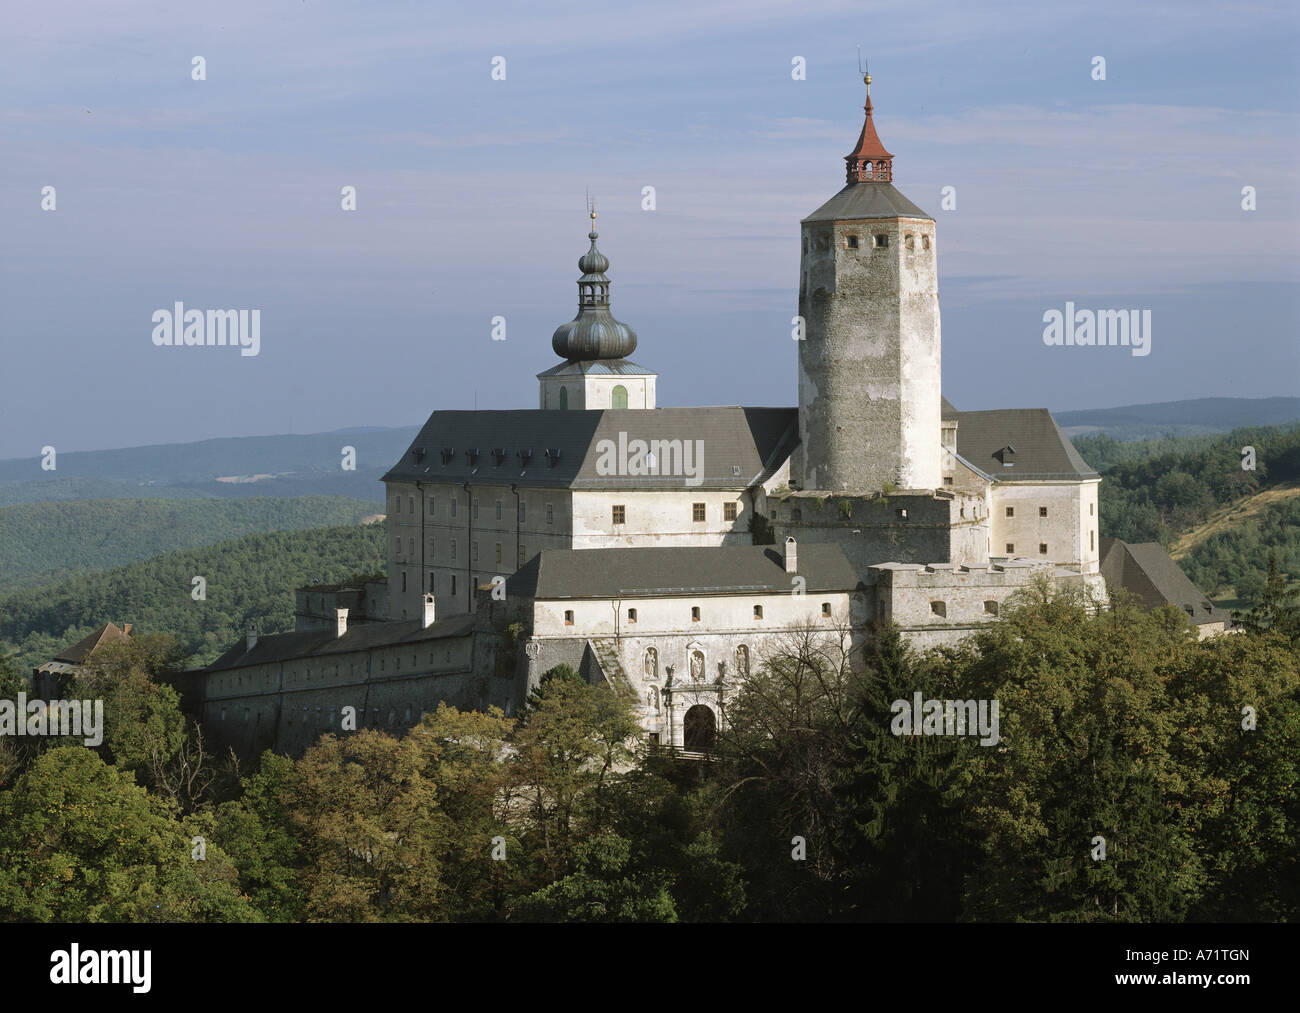 architecture, castles, Austria, Burgenland, Forchtenstein castle, exterior view, erected by counts of Mattersdorf, Europe, ruins Stock Photo